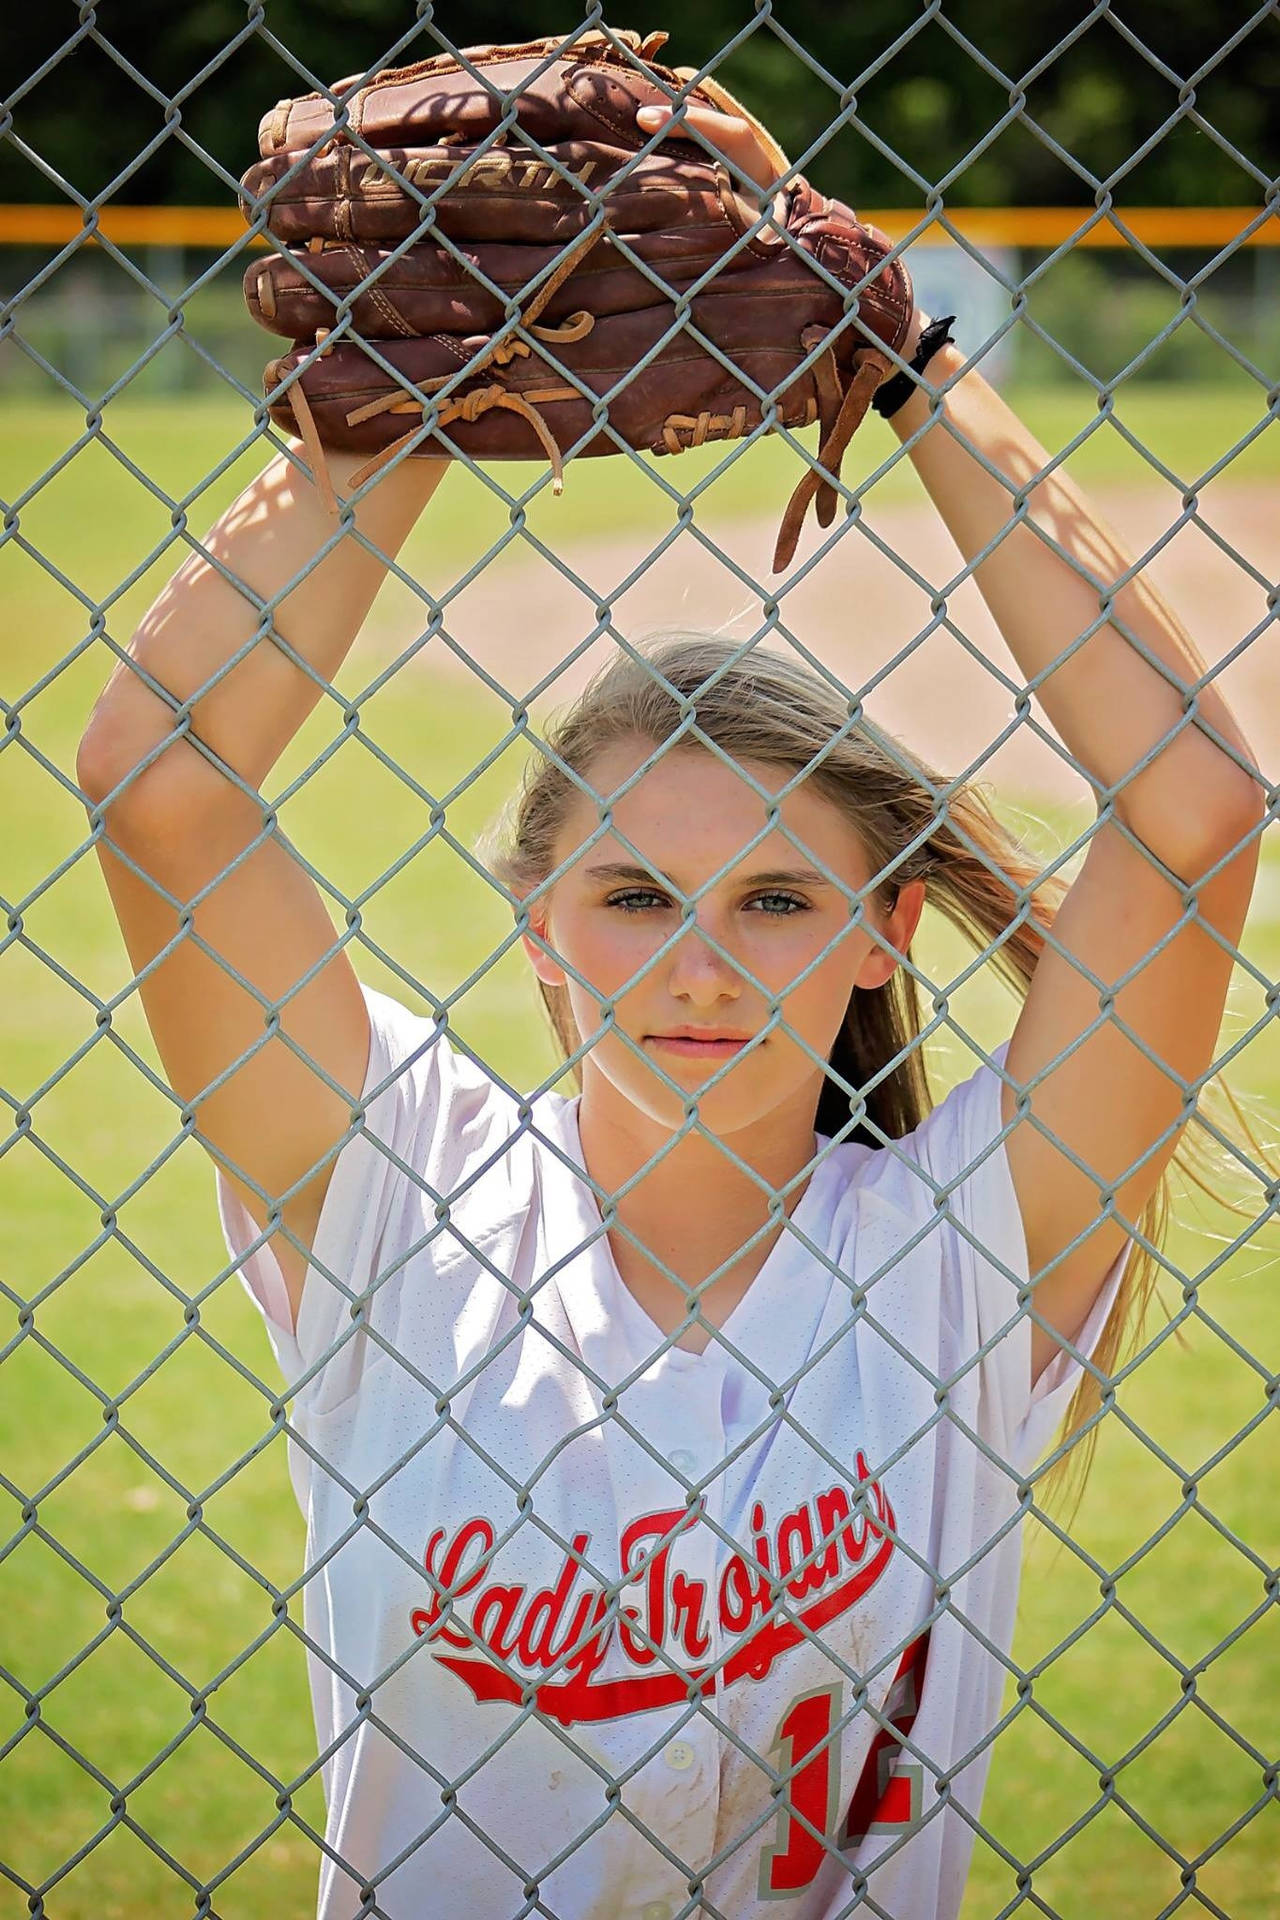 Young Girl Fiercely Pitching In A Softball Game Wallpaper